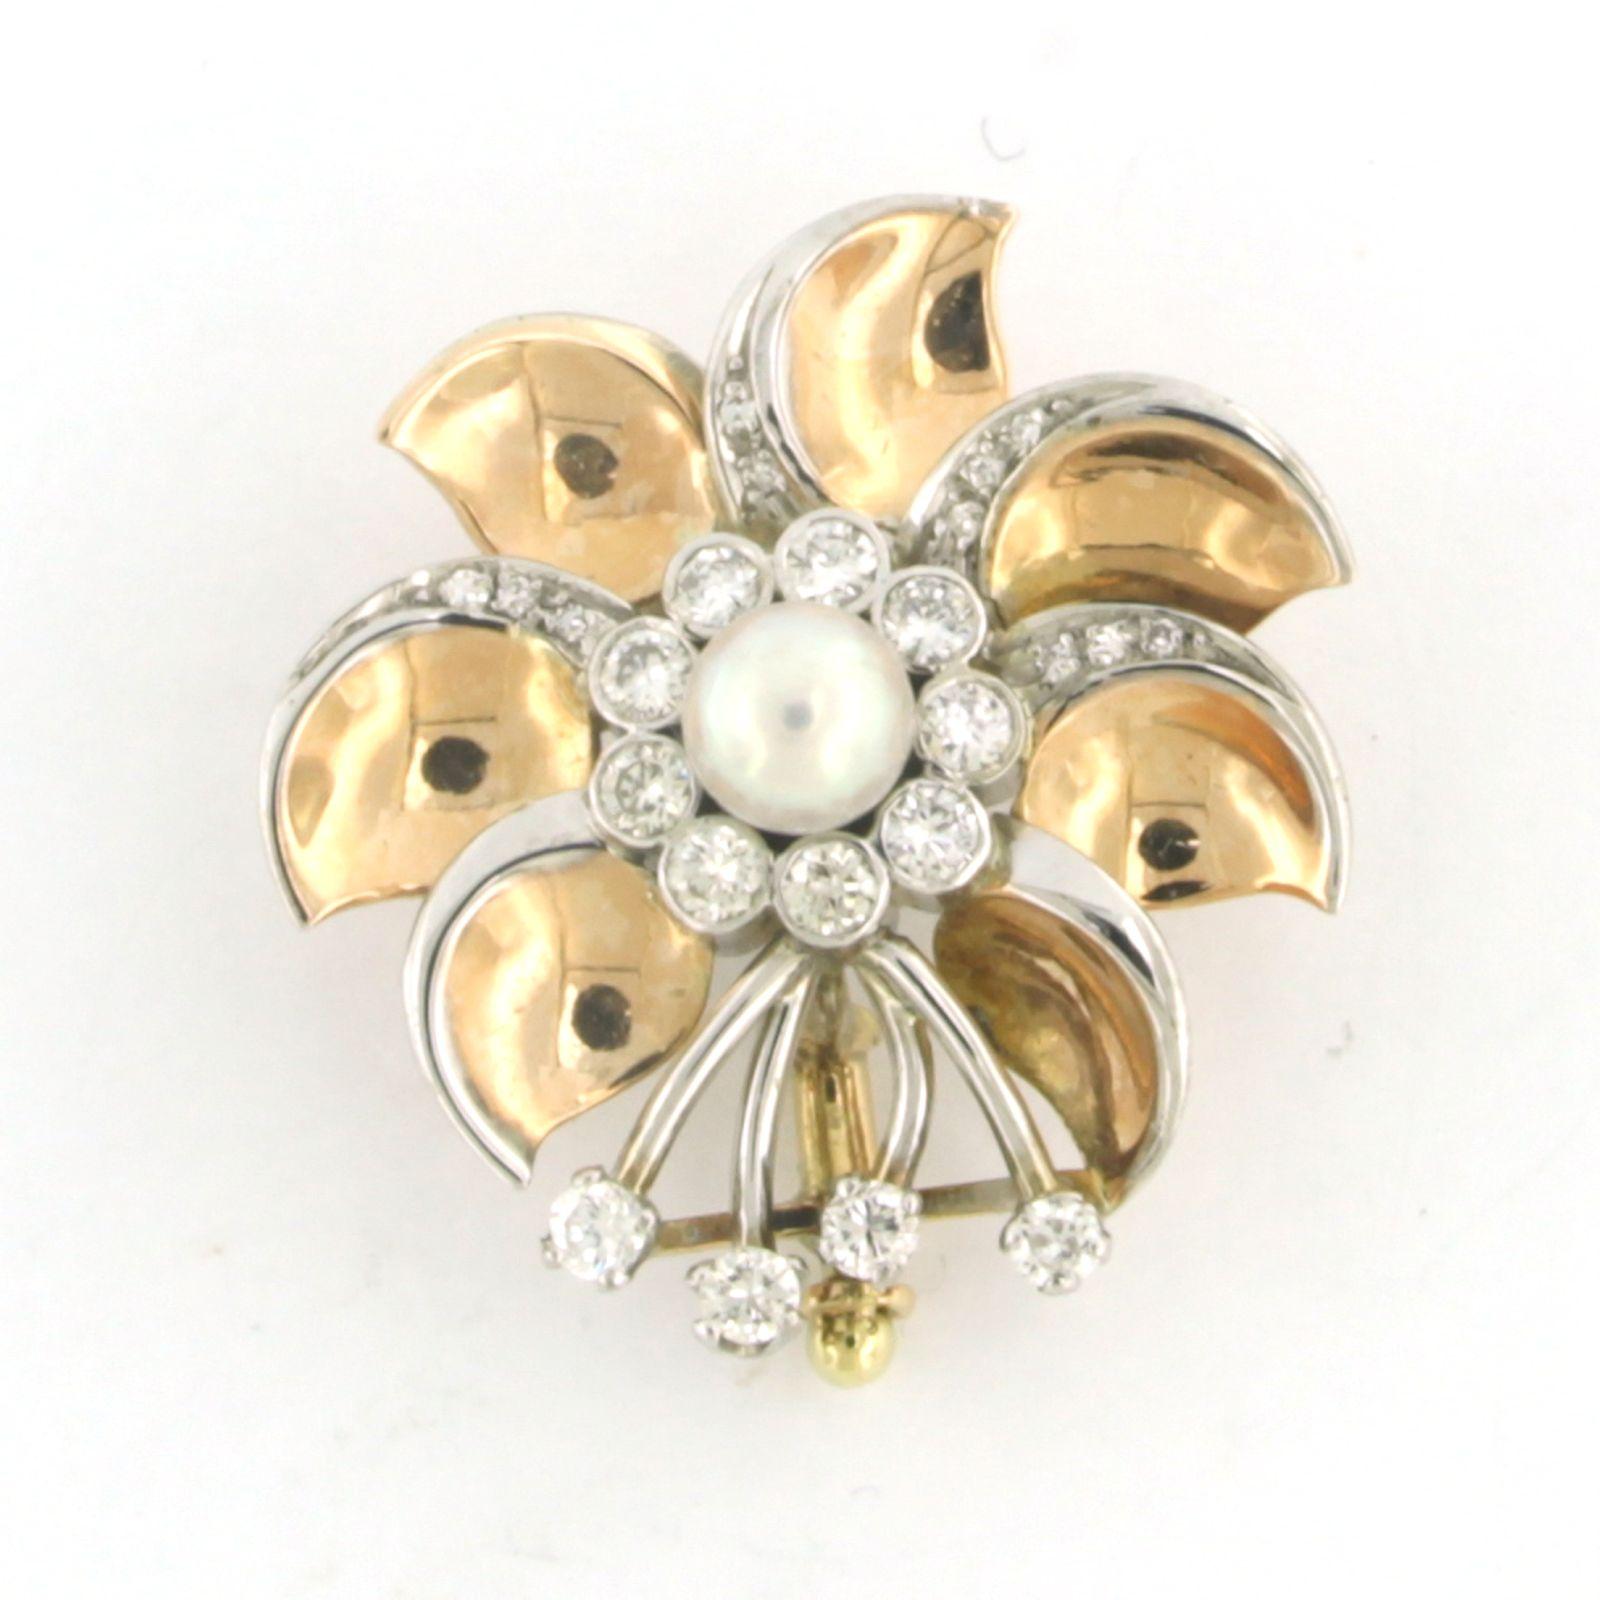 14k bicolor gold brooch set with pearl and brilliant cut diamonds. 0.48ct - F/G - VS/SI

detailed description:

The size of the brooch is 2.6 cm by 2.5 cm wide

Weight 6.0 grams

Occupied with

- 1 x 5.0 mm freshwater cultured pearl

colour